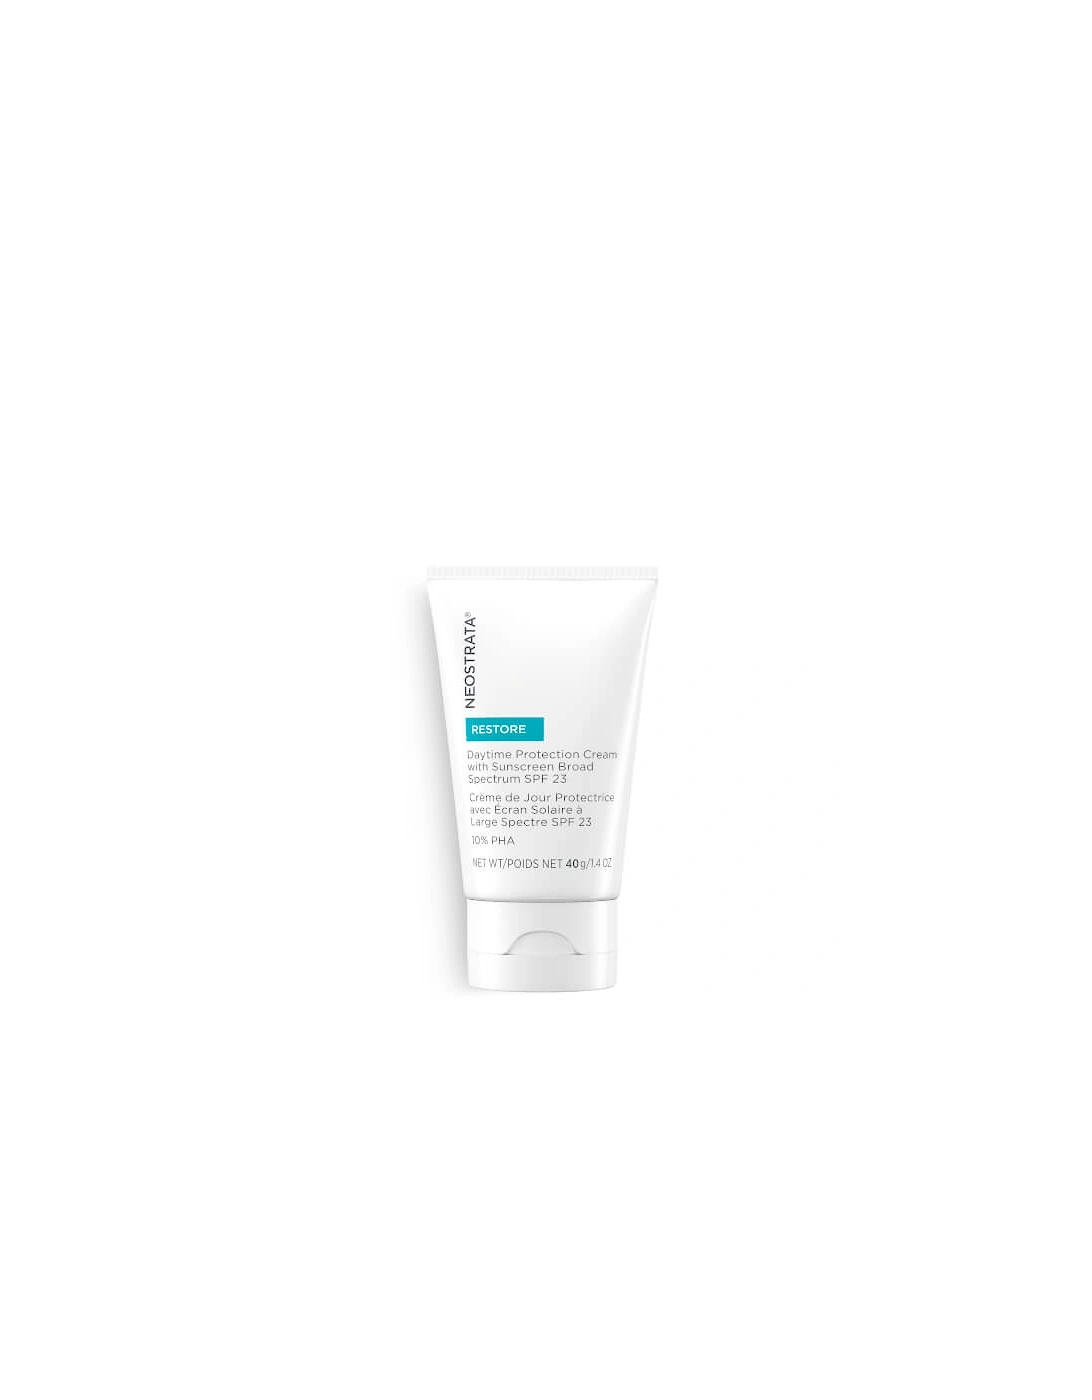 Restore Daytime Protection Cream Suncream for Face with SPF 23 40g, 2 of 1